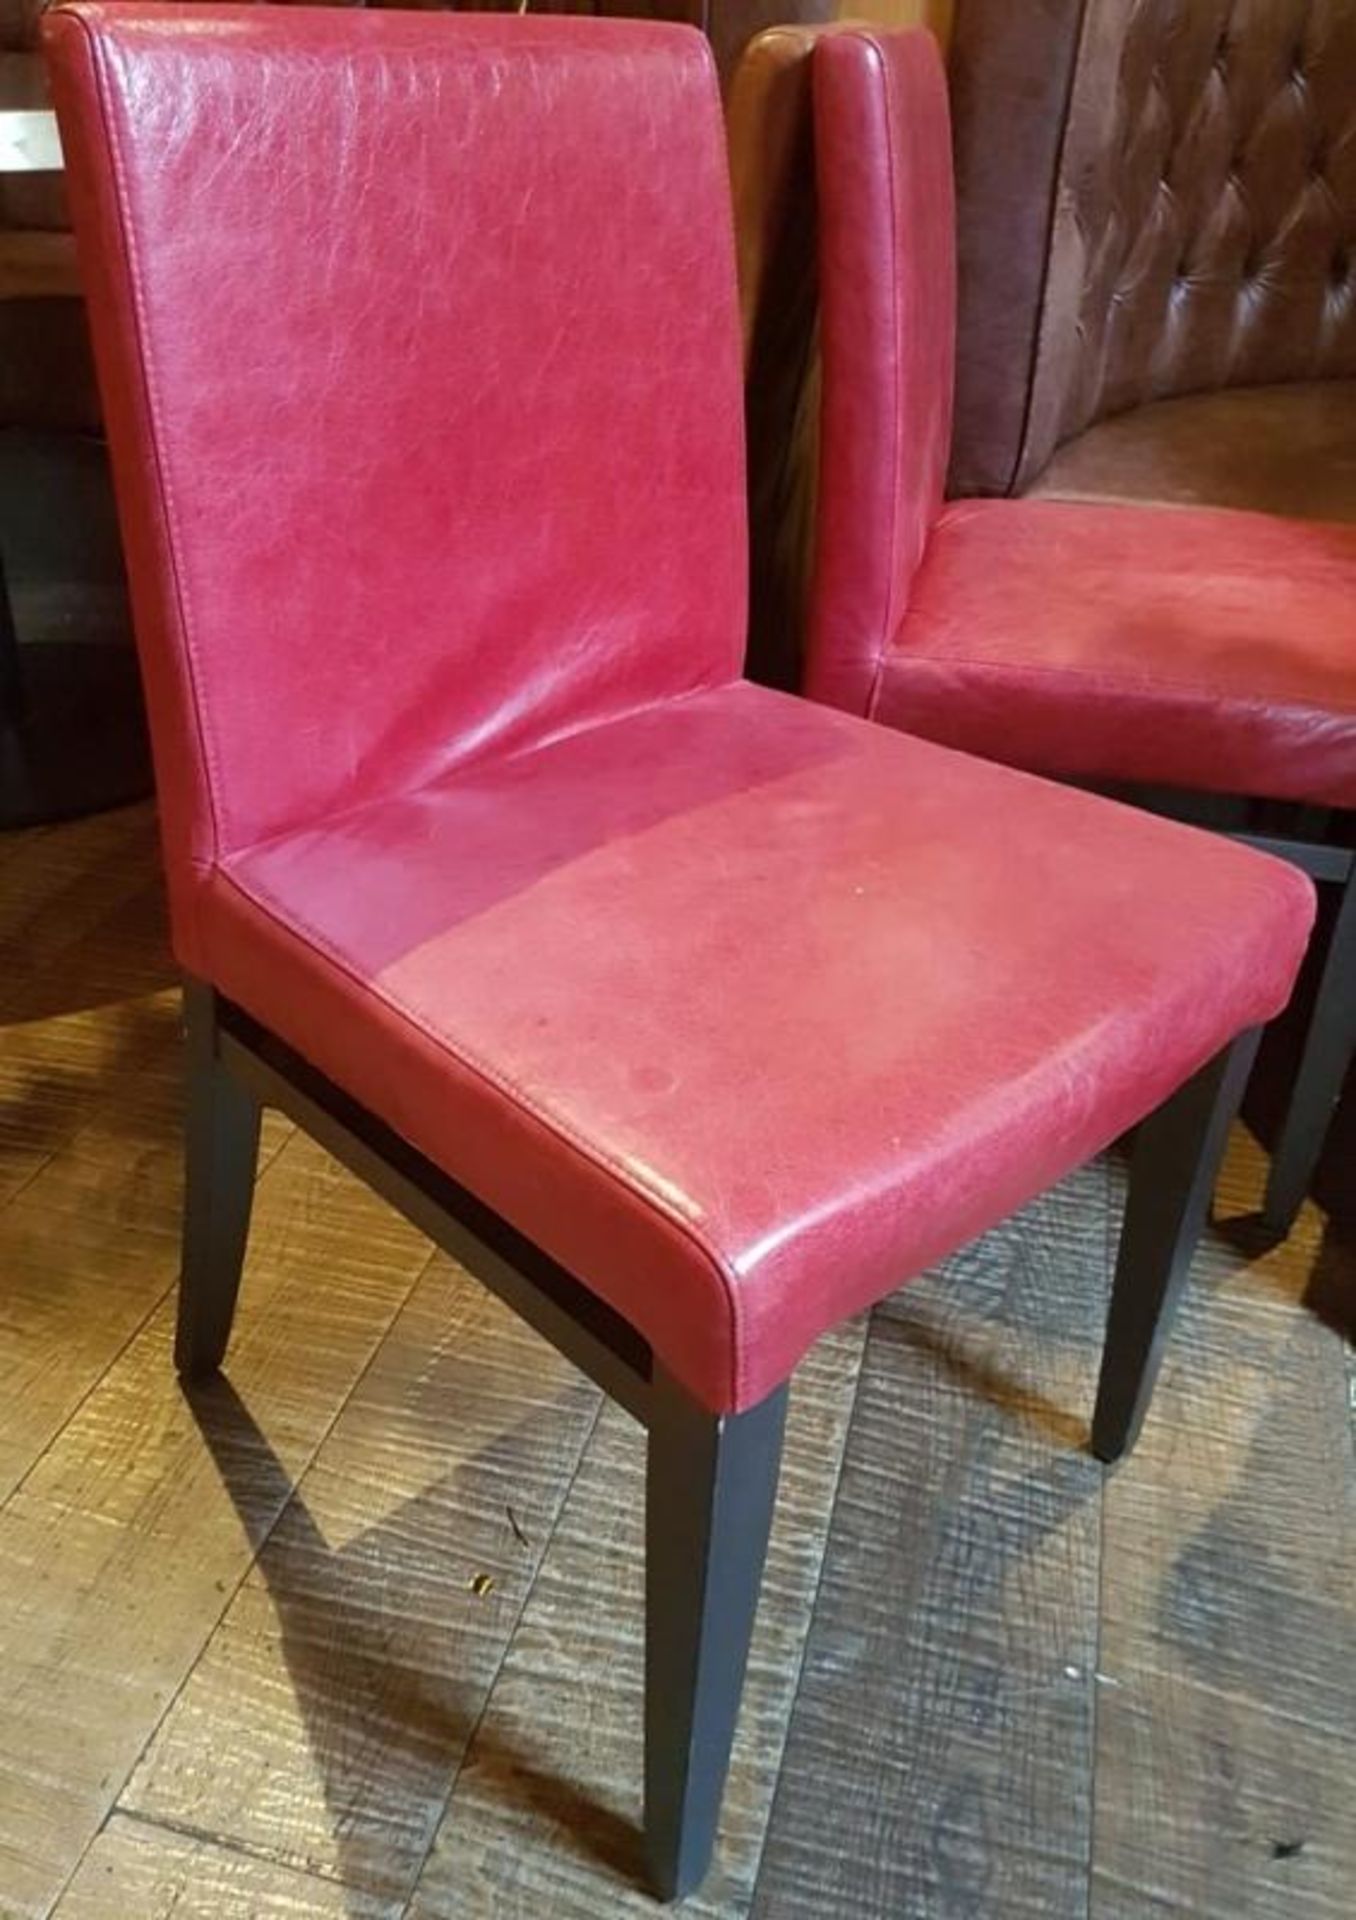 4 x Hard-wearing Red Leather Upholstered Commercial Dining Chairs - Recently Removed From A City Cen - Image 2 of 4